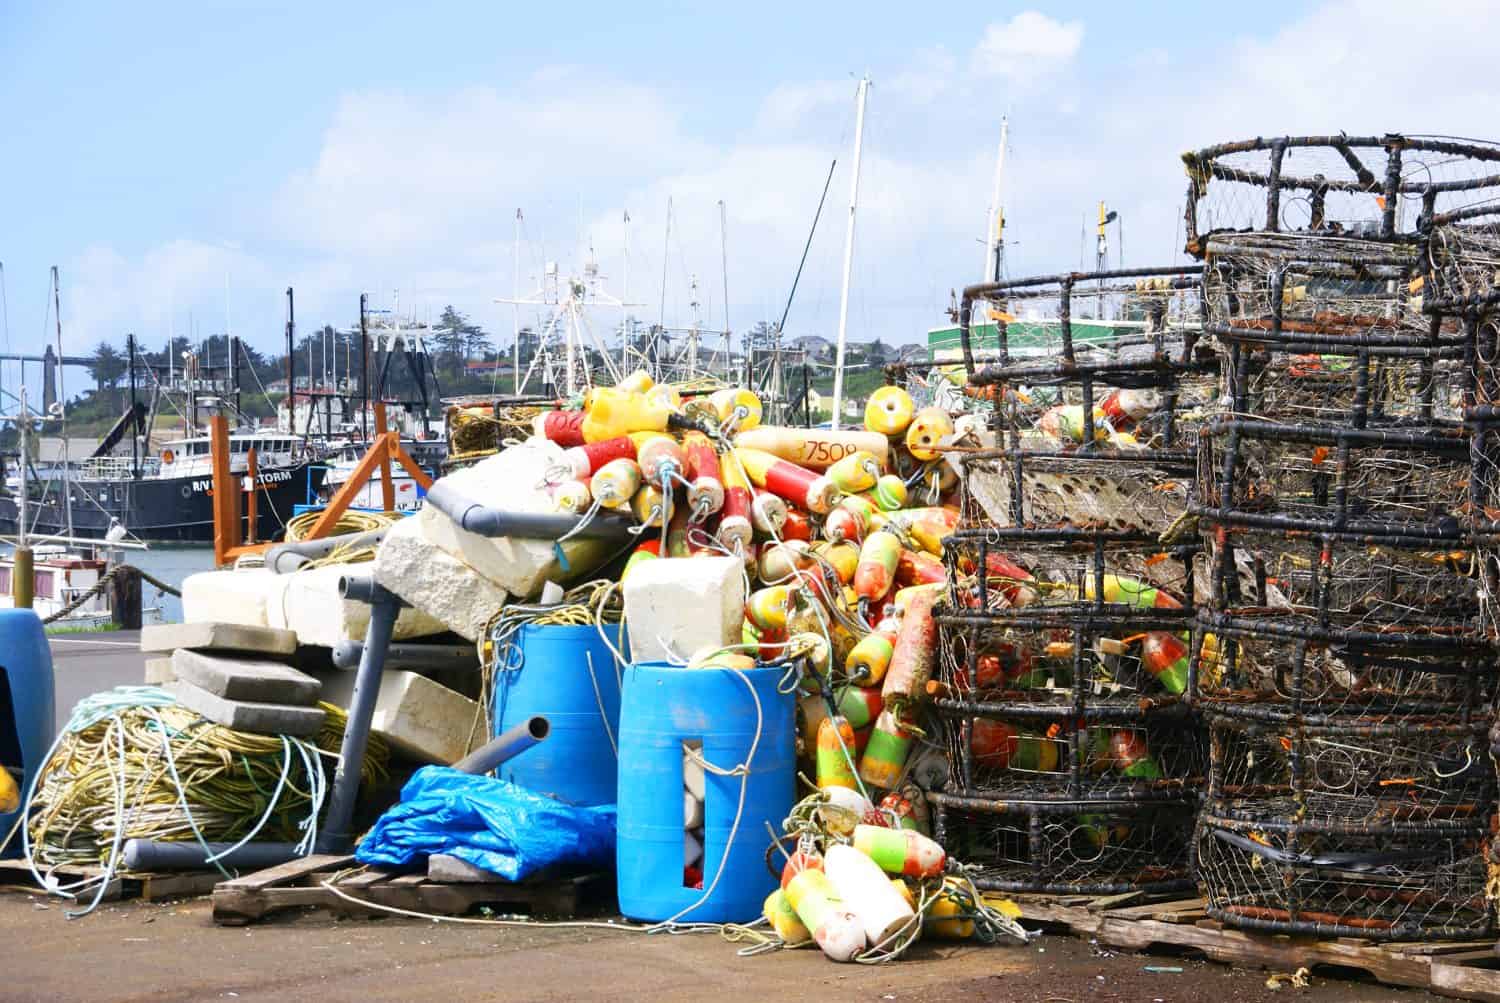 Crab traps, pots and floats, stacked on wharf,  Newport, Oregon Coast